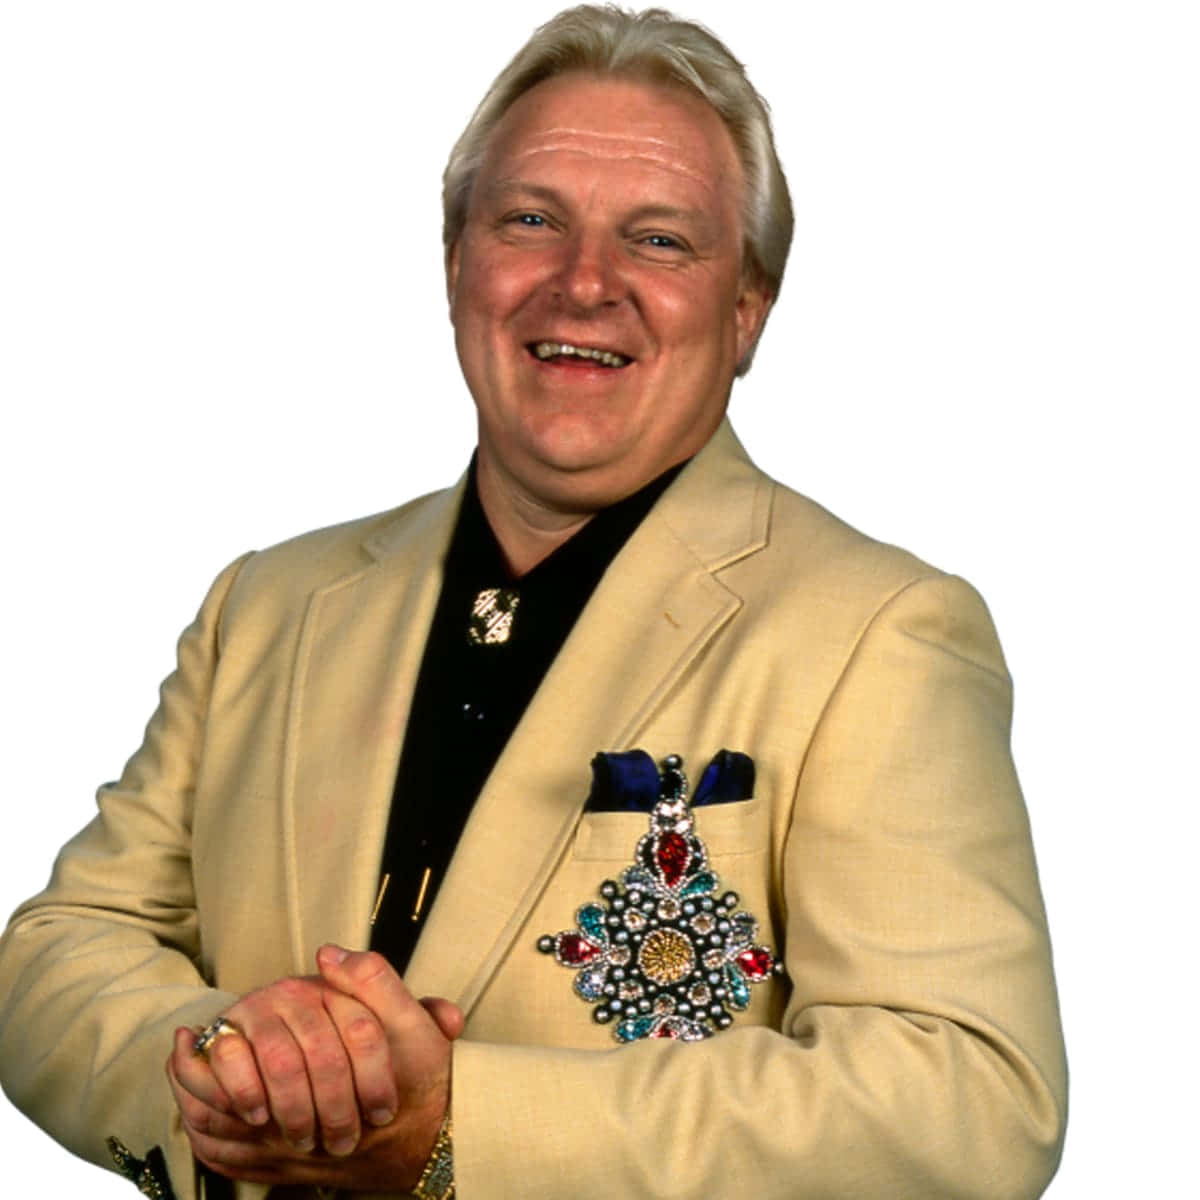 The Inimitable Bobby "The Brain" Heenan, Icon of Pro Wrestling Wallpaper